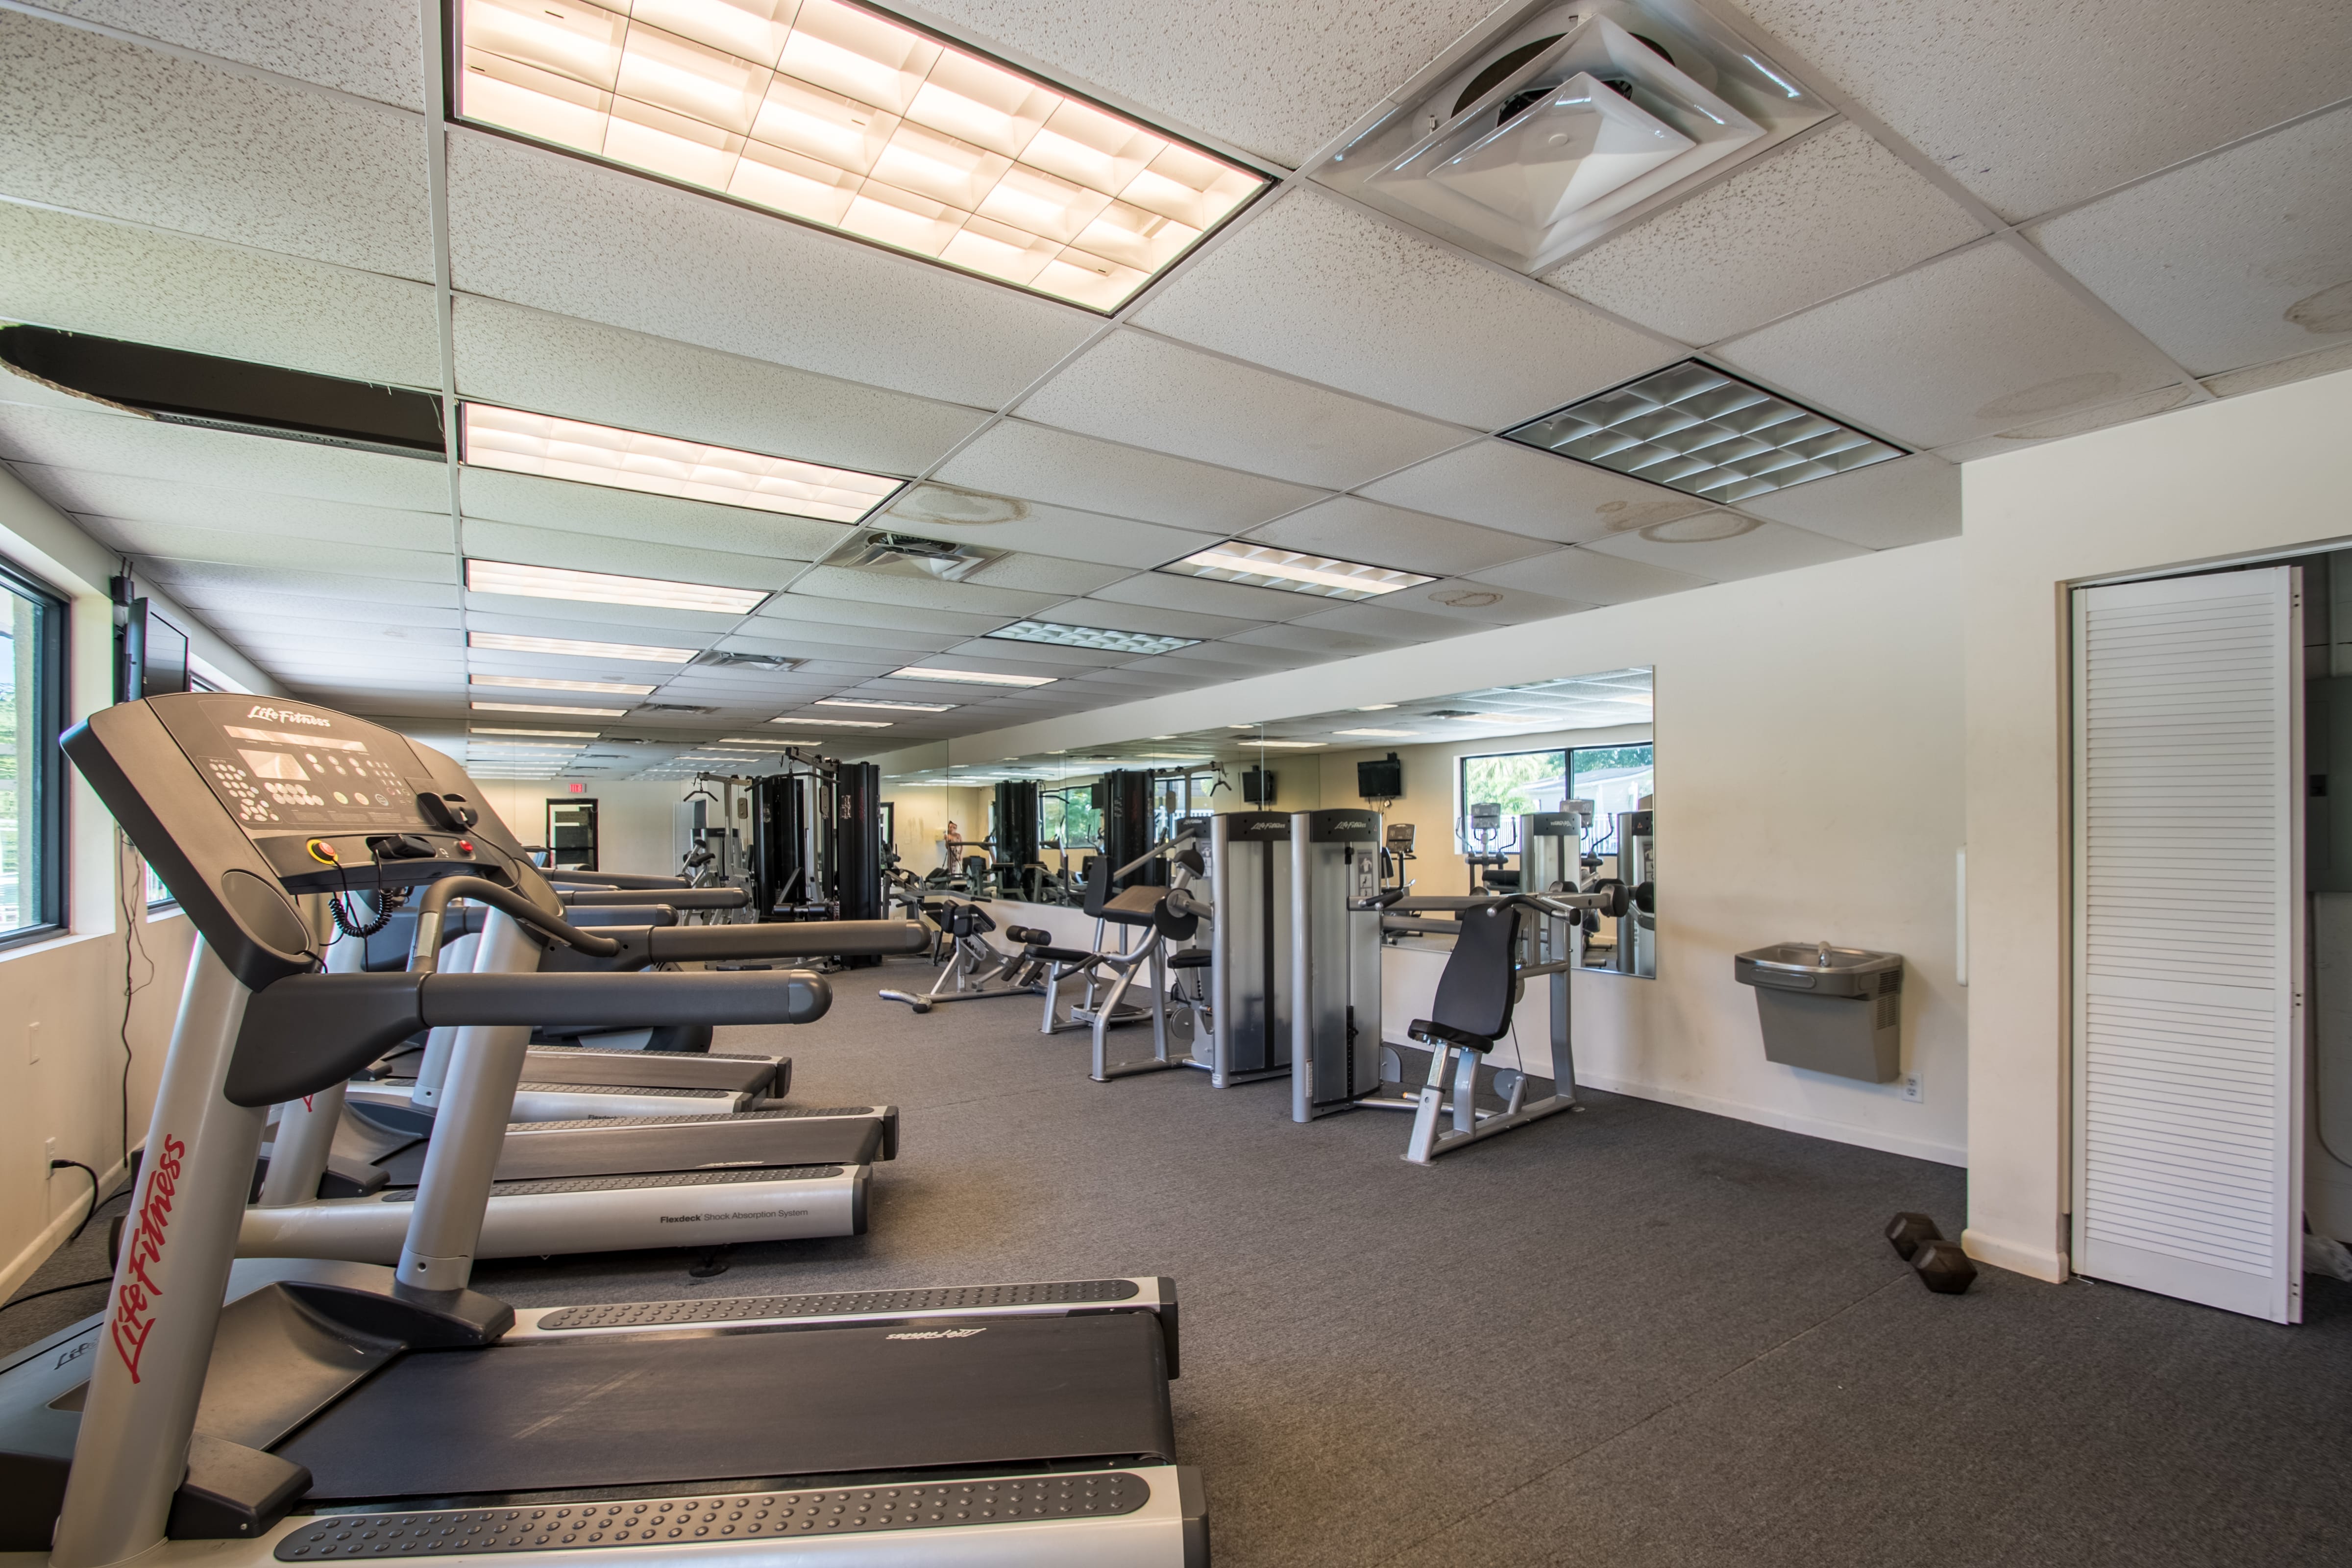 Fitness center in the community equipped with treadmills, weight machines and water fountain.